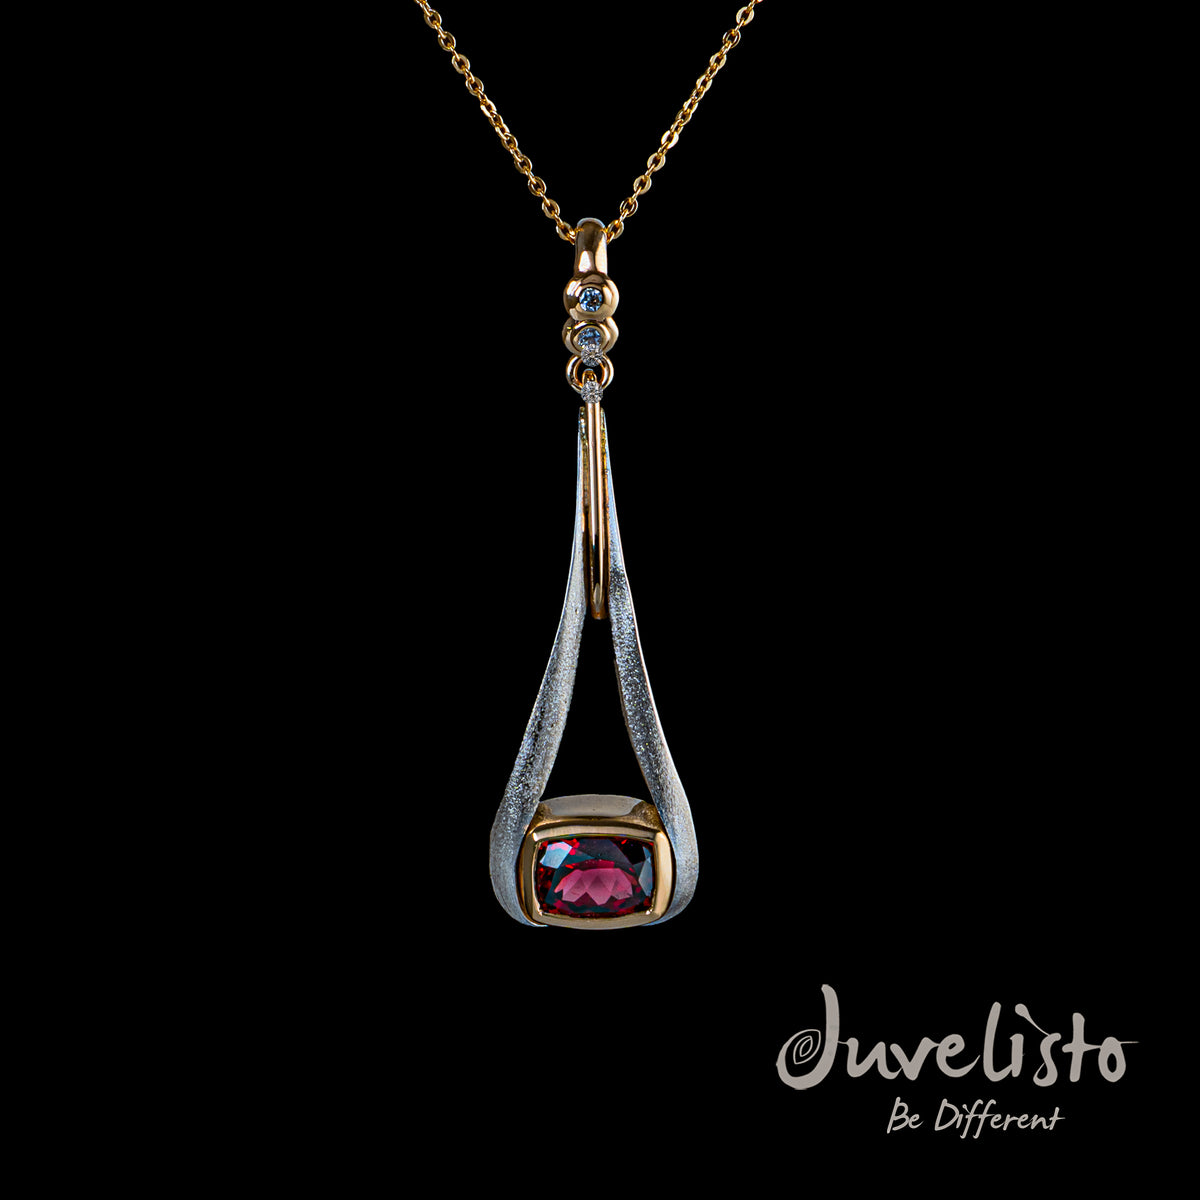 Juvelisto Design Sterling Silver Pendant with 14K Yellow Gold, Rhodolite Garnet  and diamonds